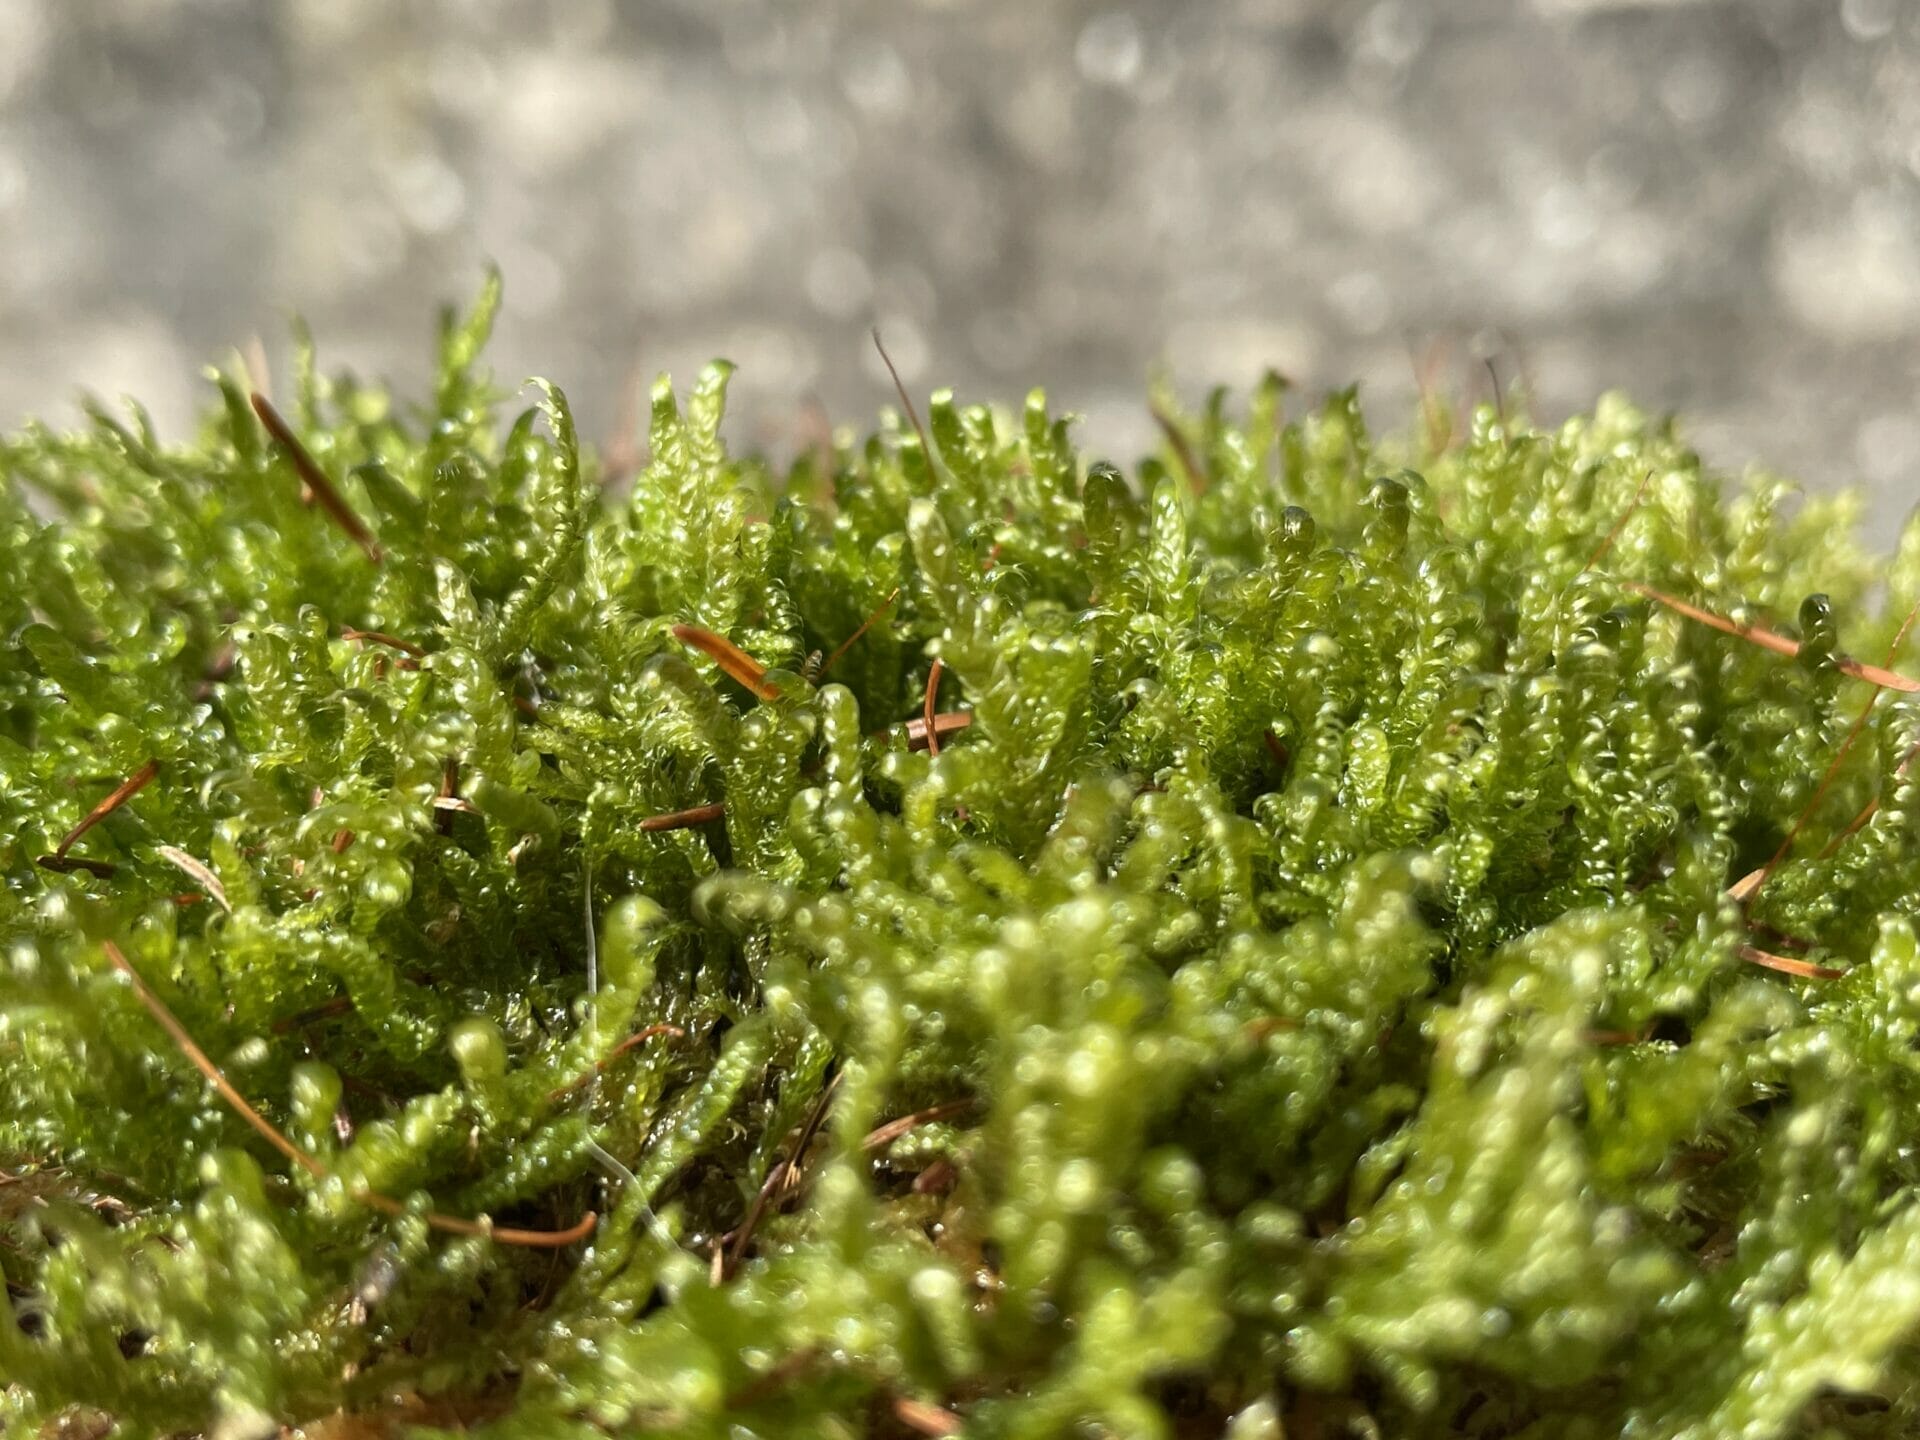 How To Use Live Sheet Moss Indoors and Outdoors